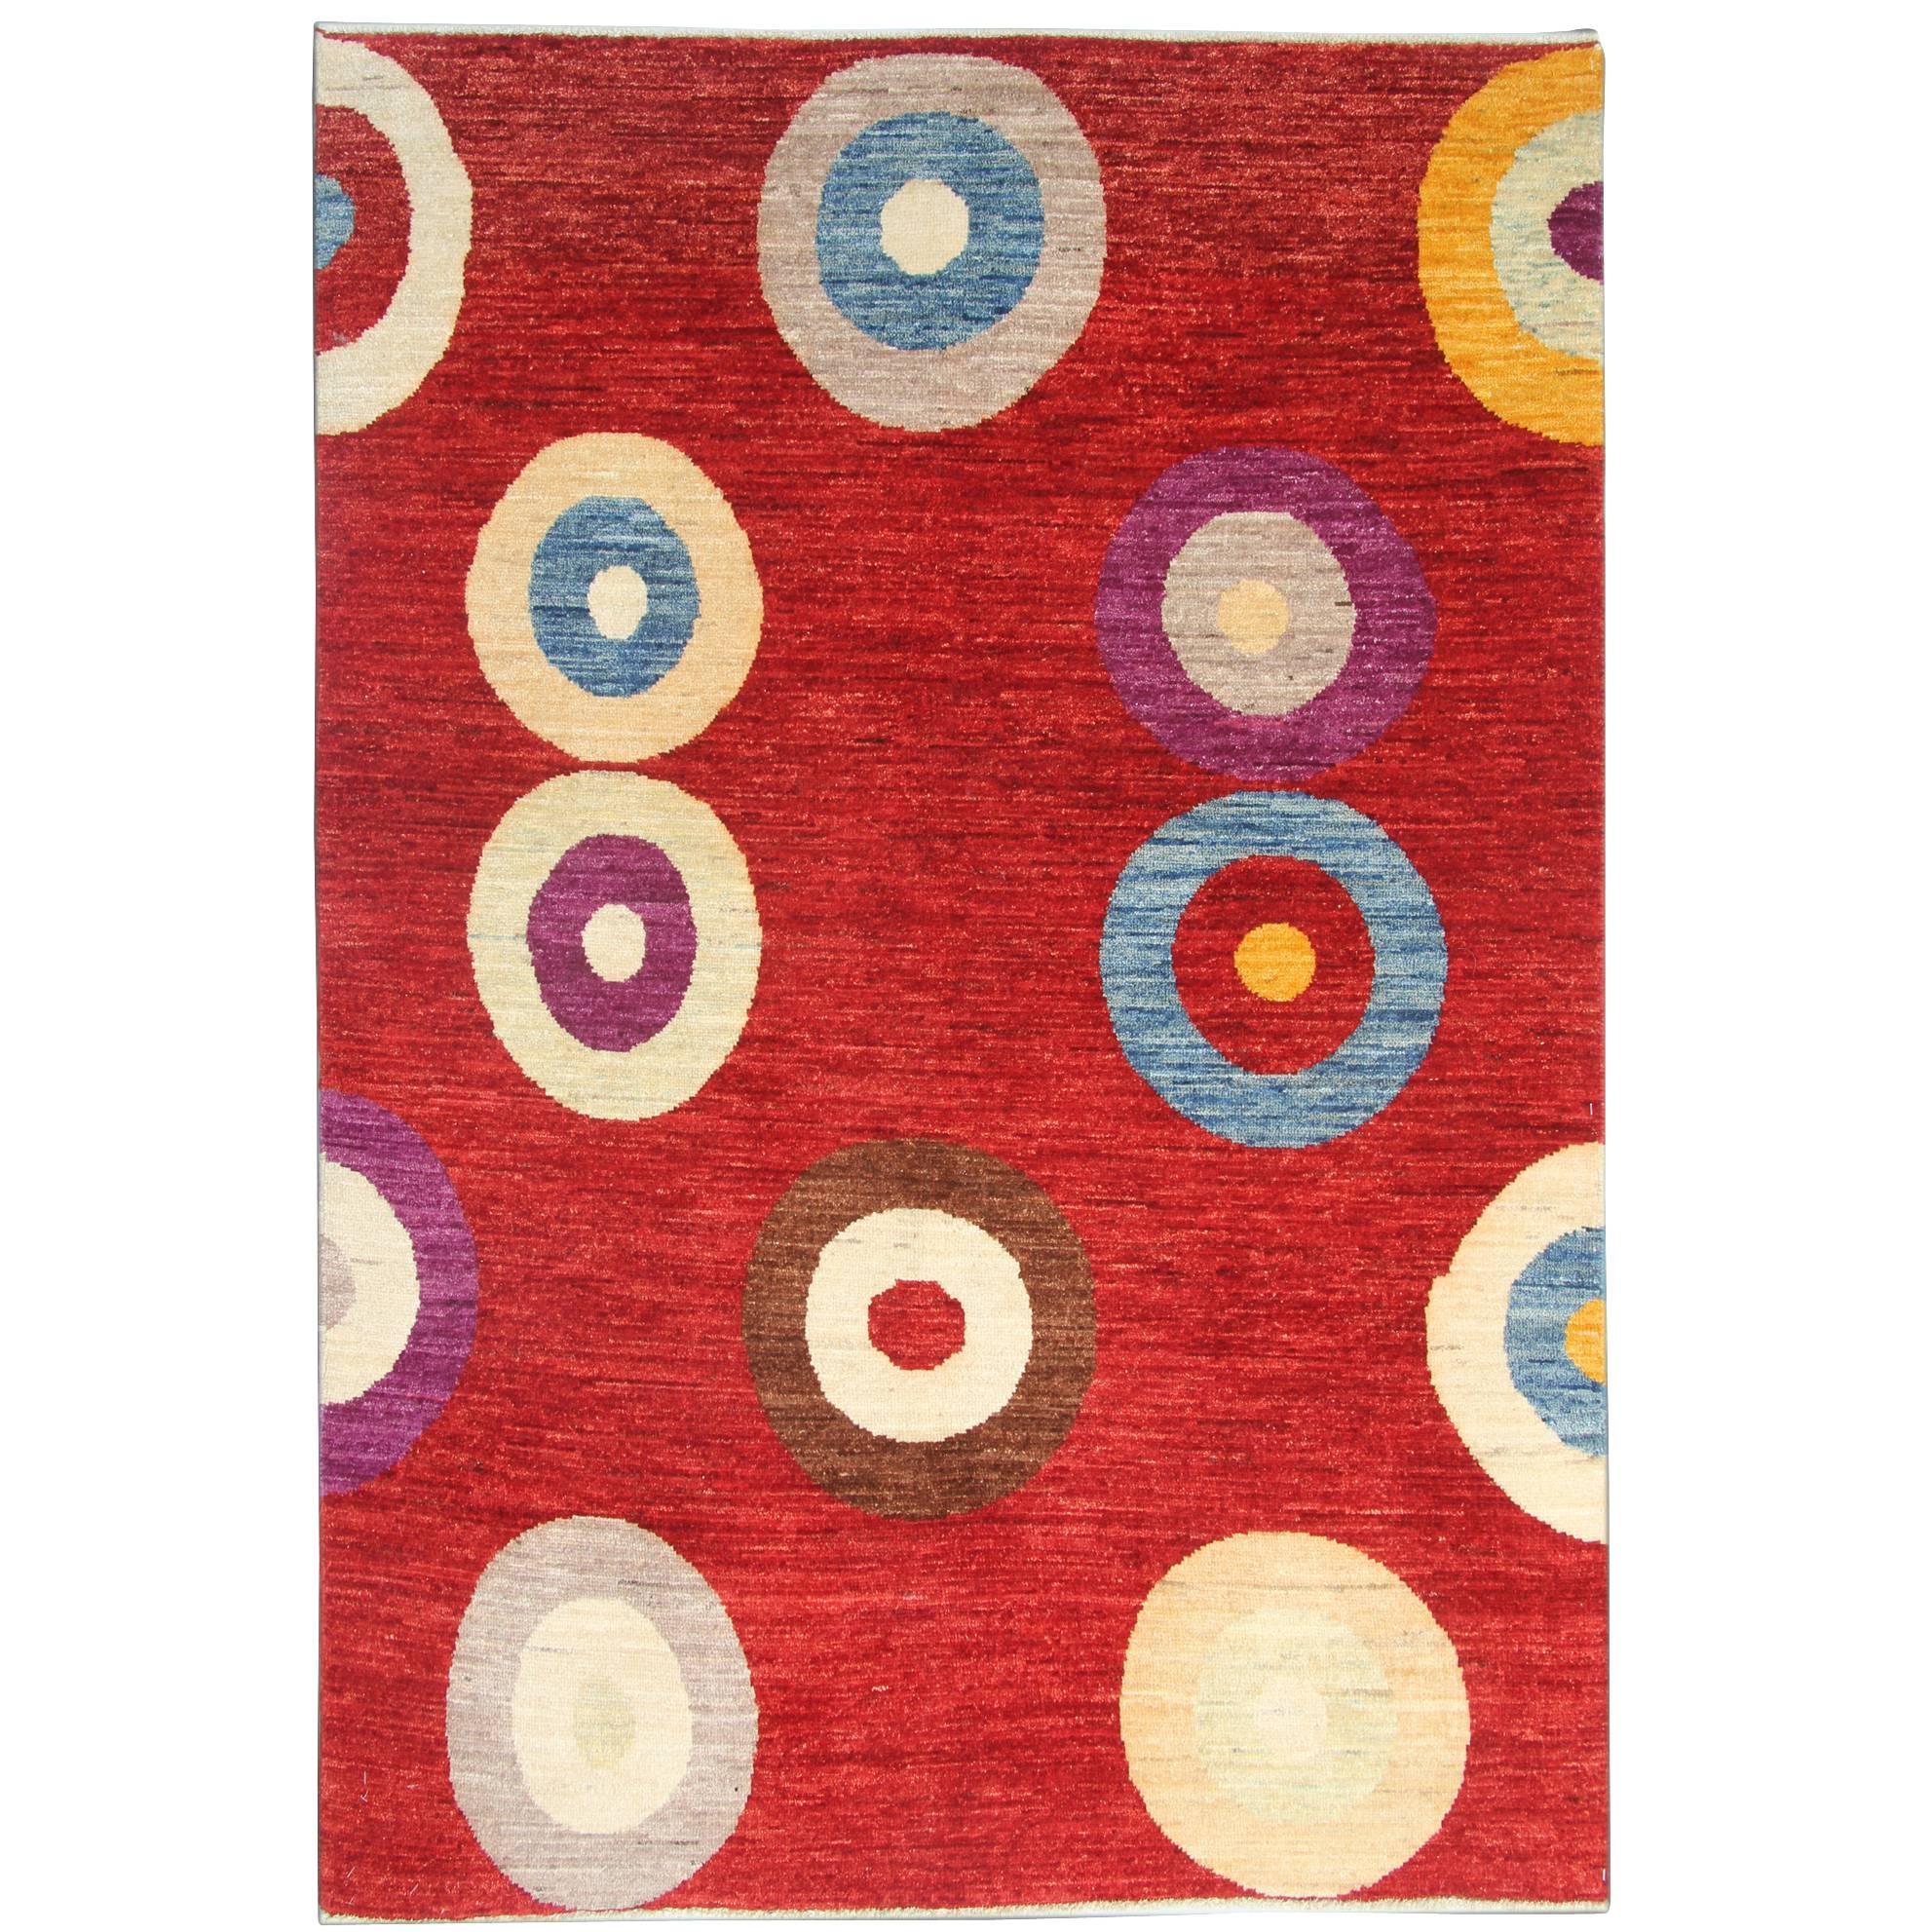 Fine Contemporary Rugs, Modern Carpet, Designer Rugs from Afghanistan